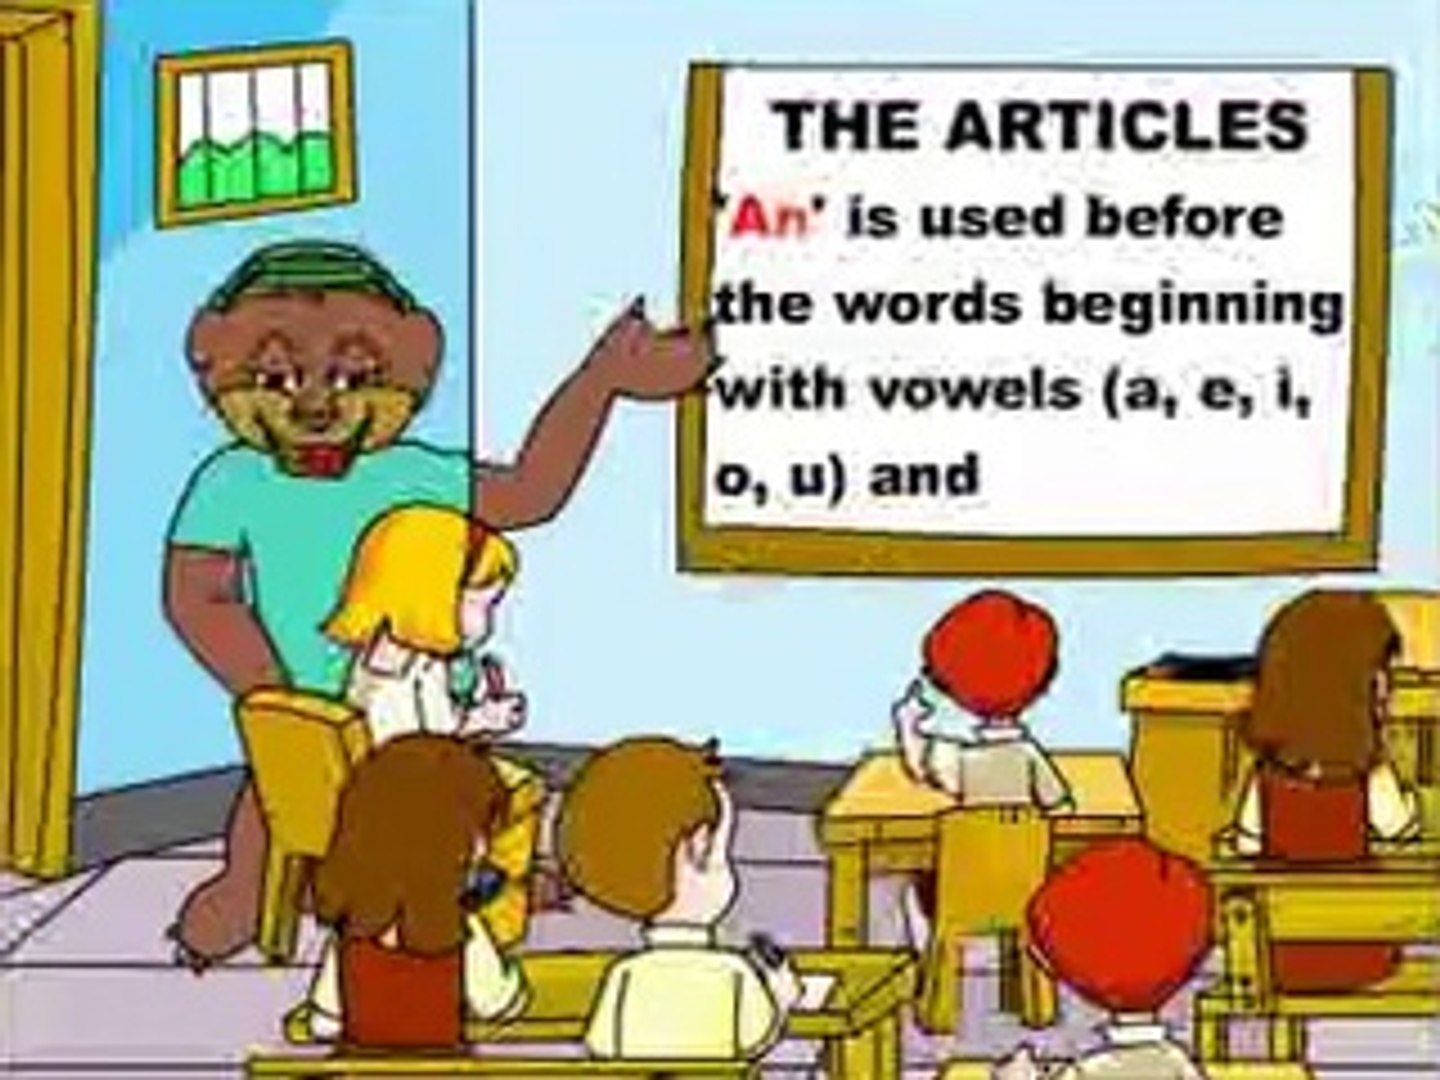 articles-articles with examples-learn grammar-learn english-learn articles-english grammar(1)